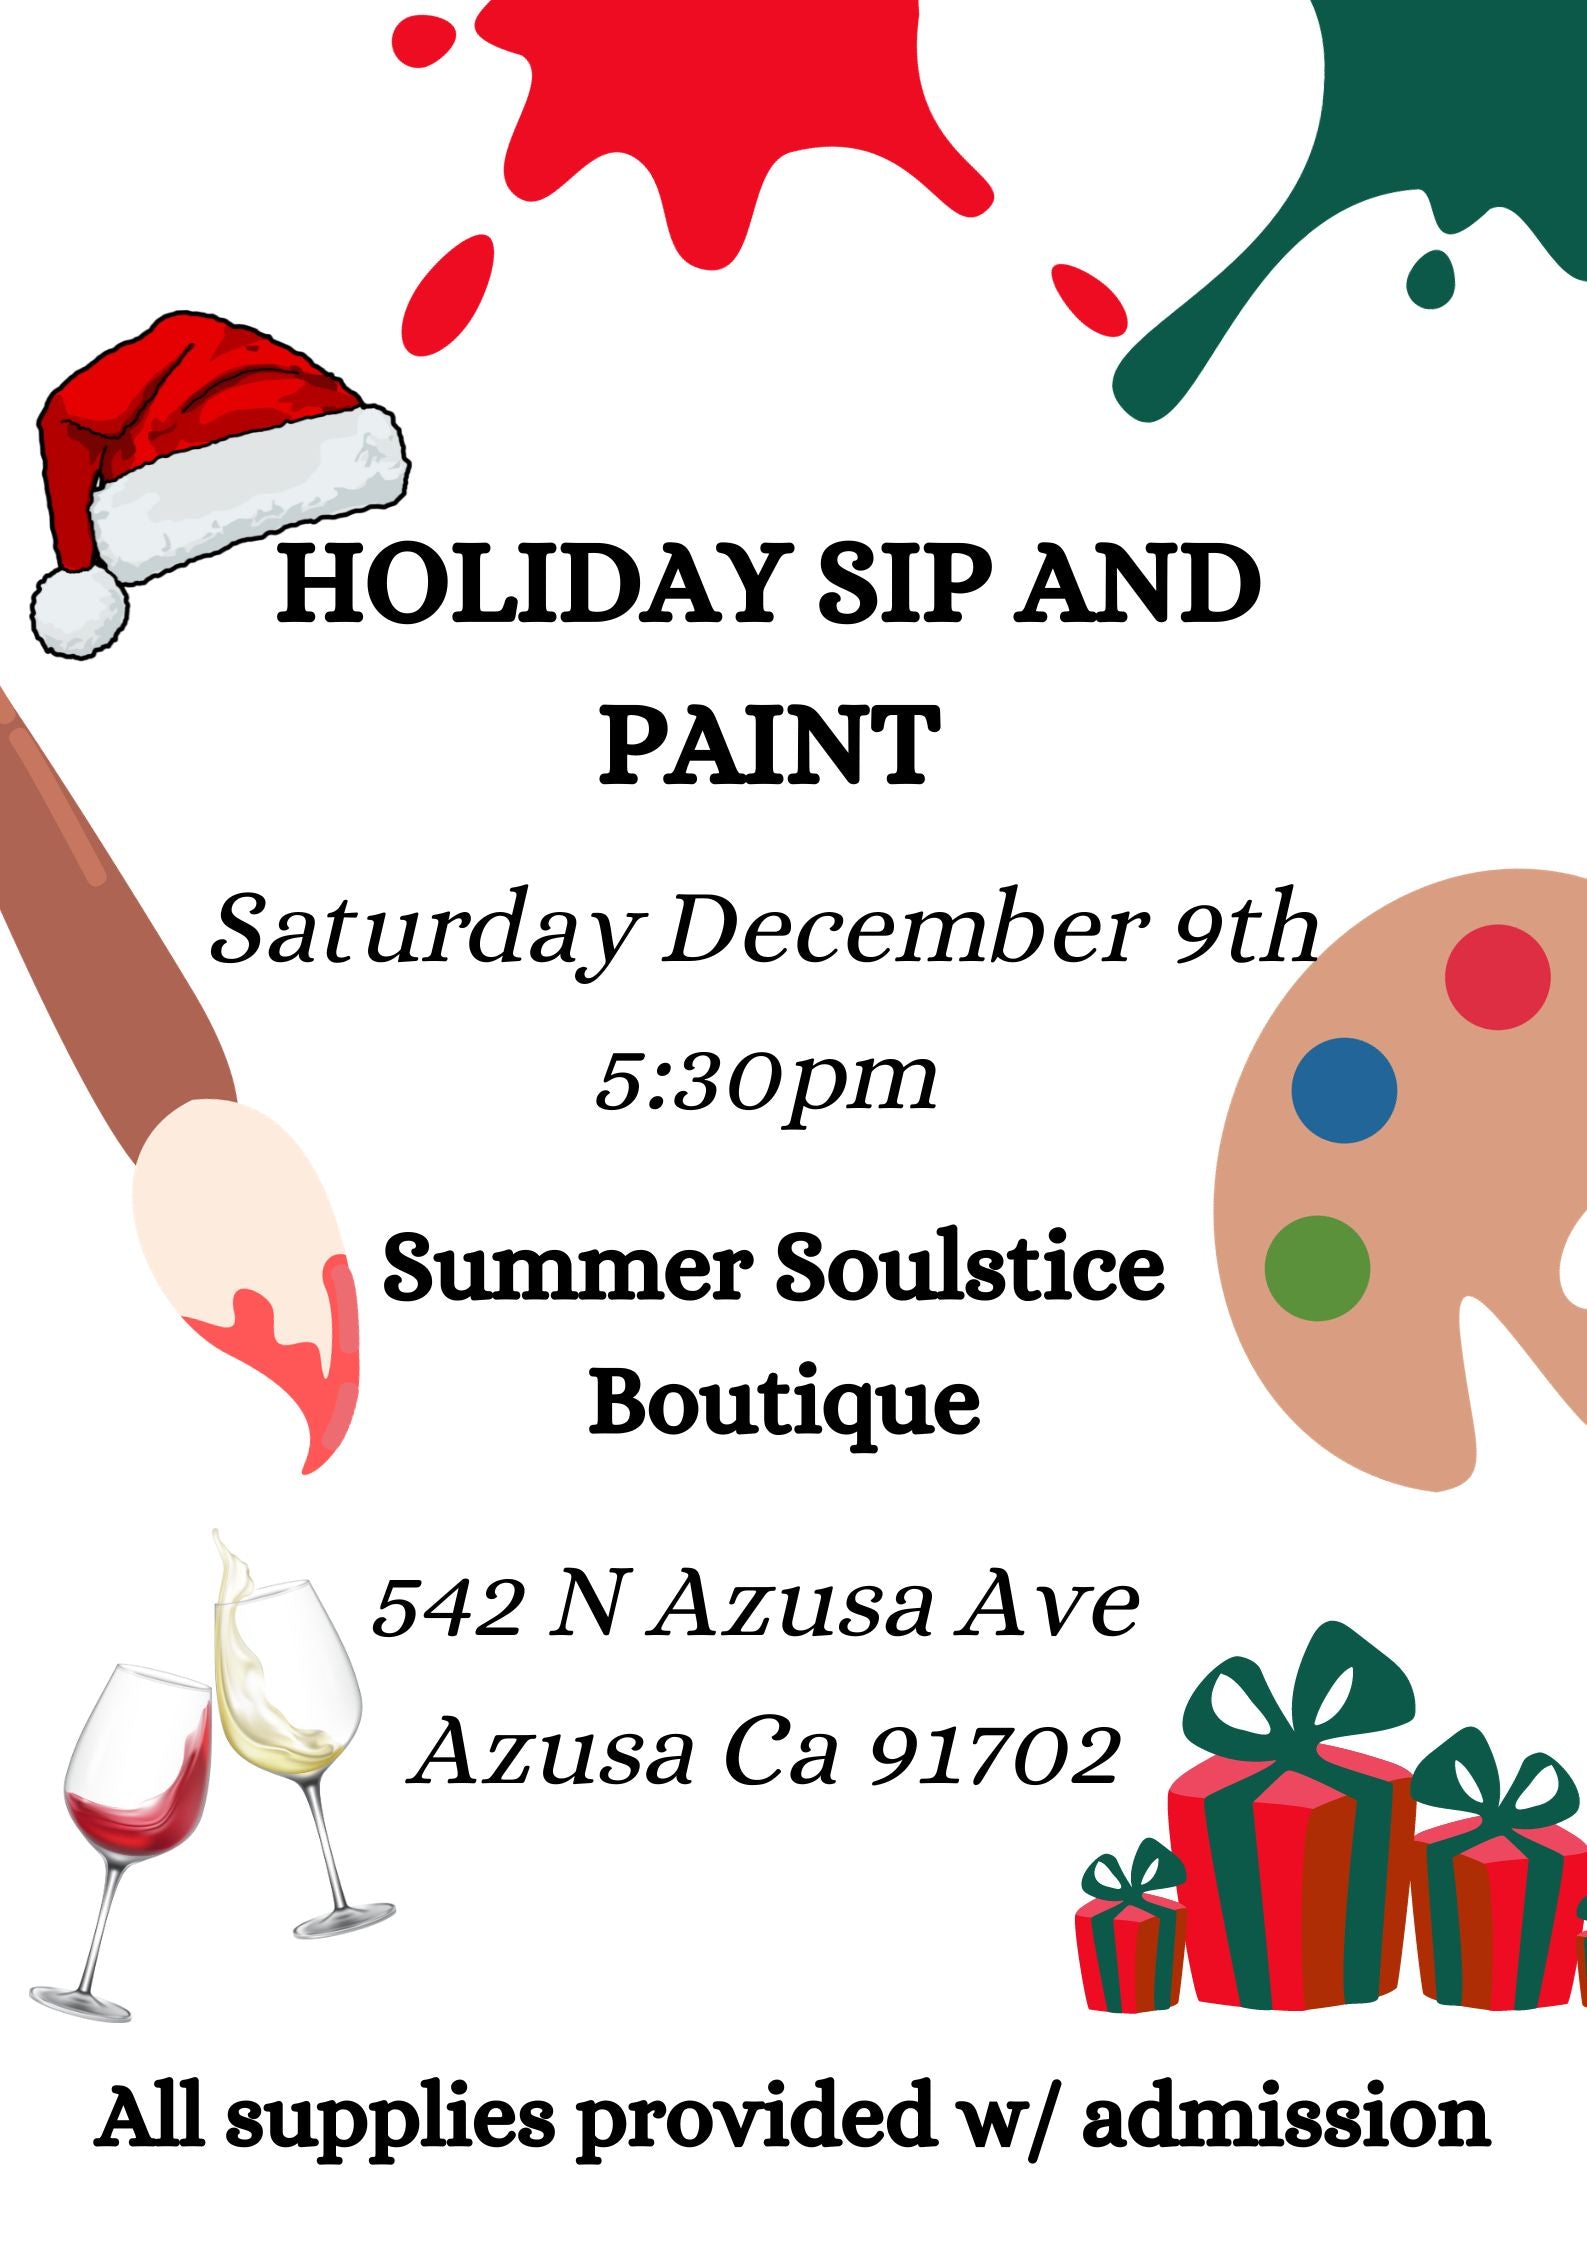 Holiday Sip and Paint